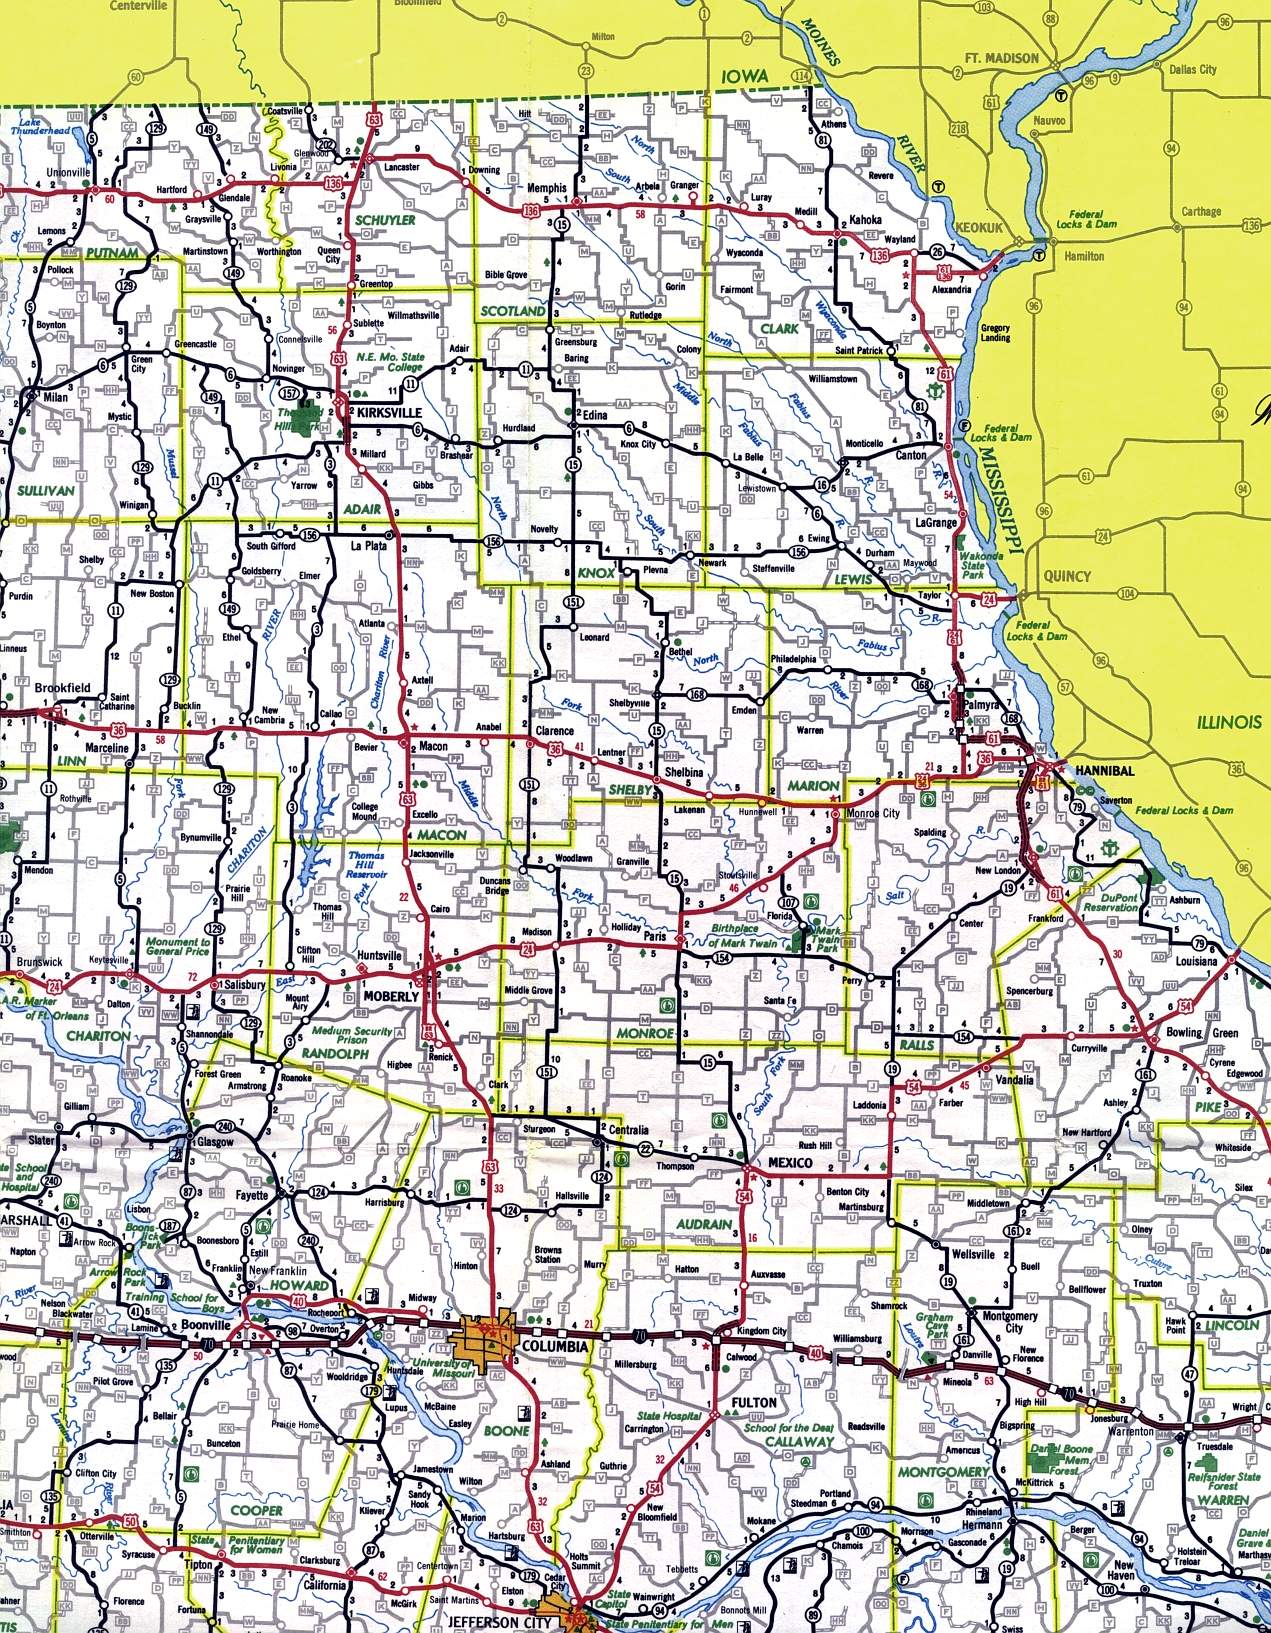 Northeast-central section of Missouri from 1969 official highway map